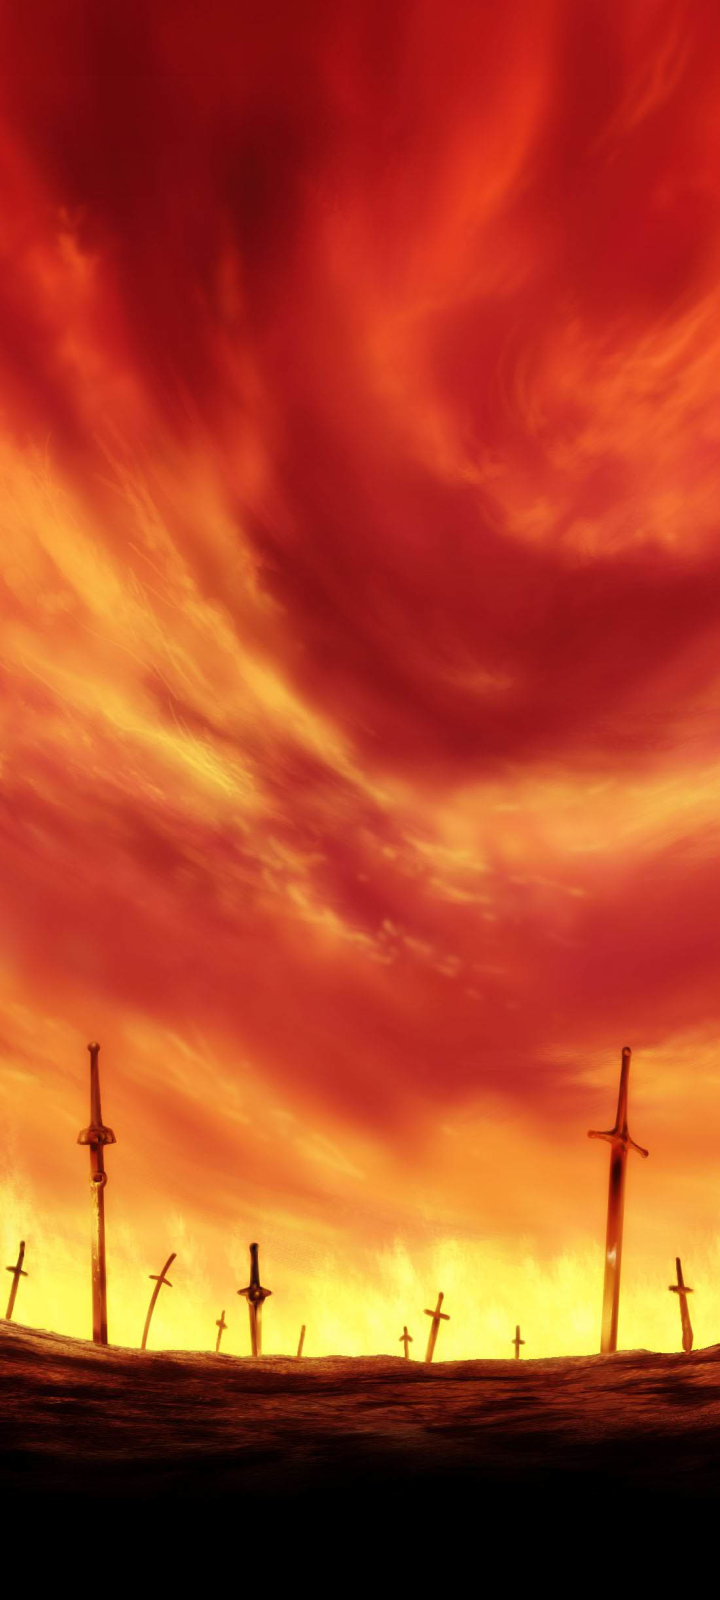 Fate/Stay Night: Unlimited Blade Works Phone Wallpaper